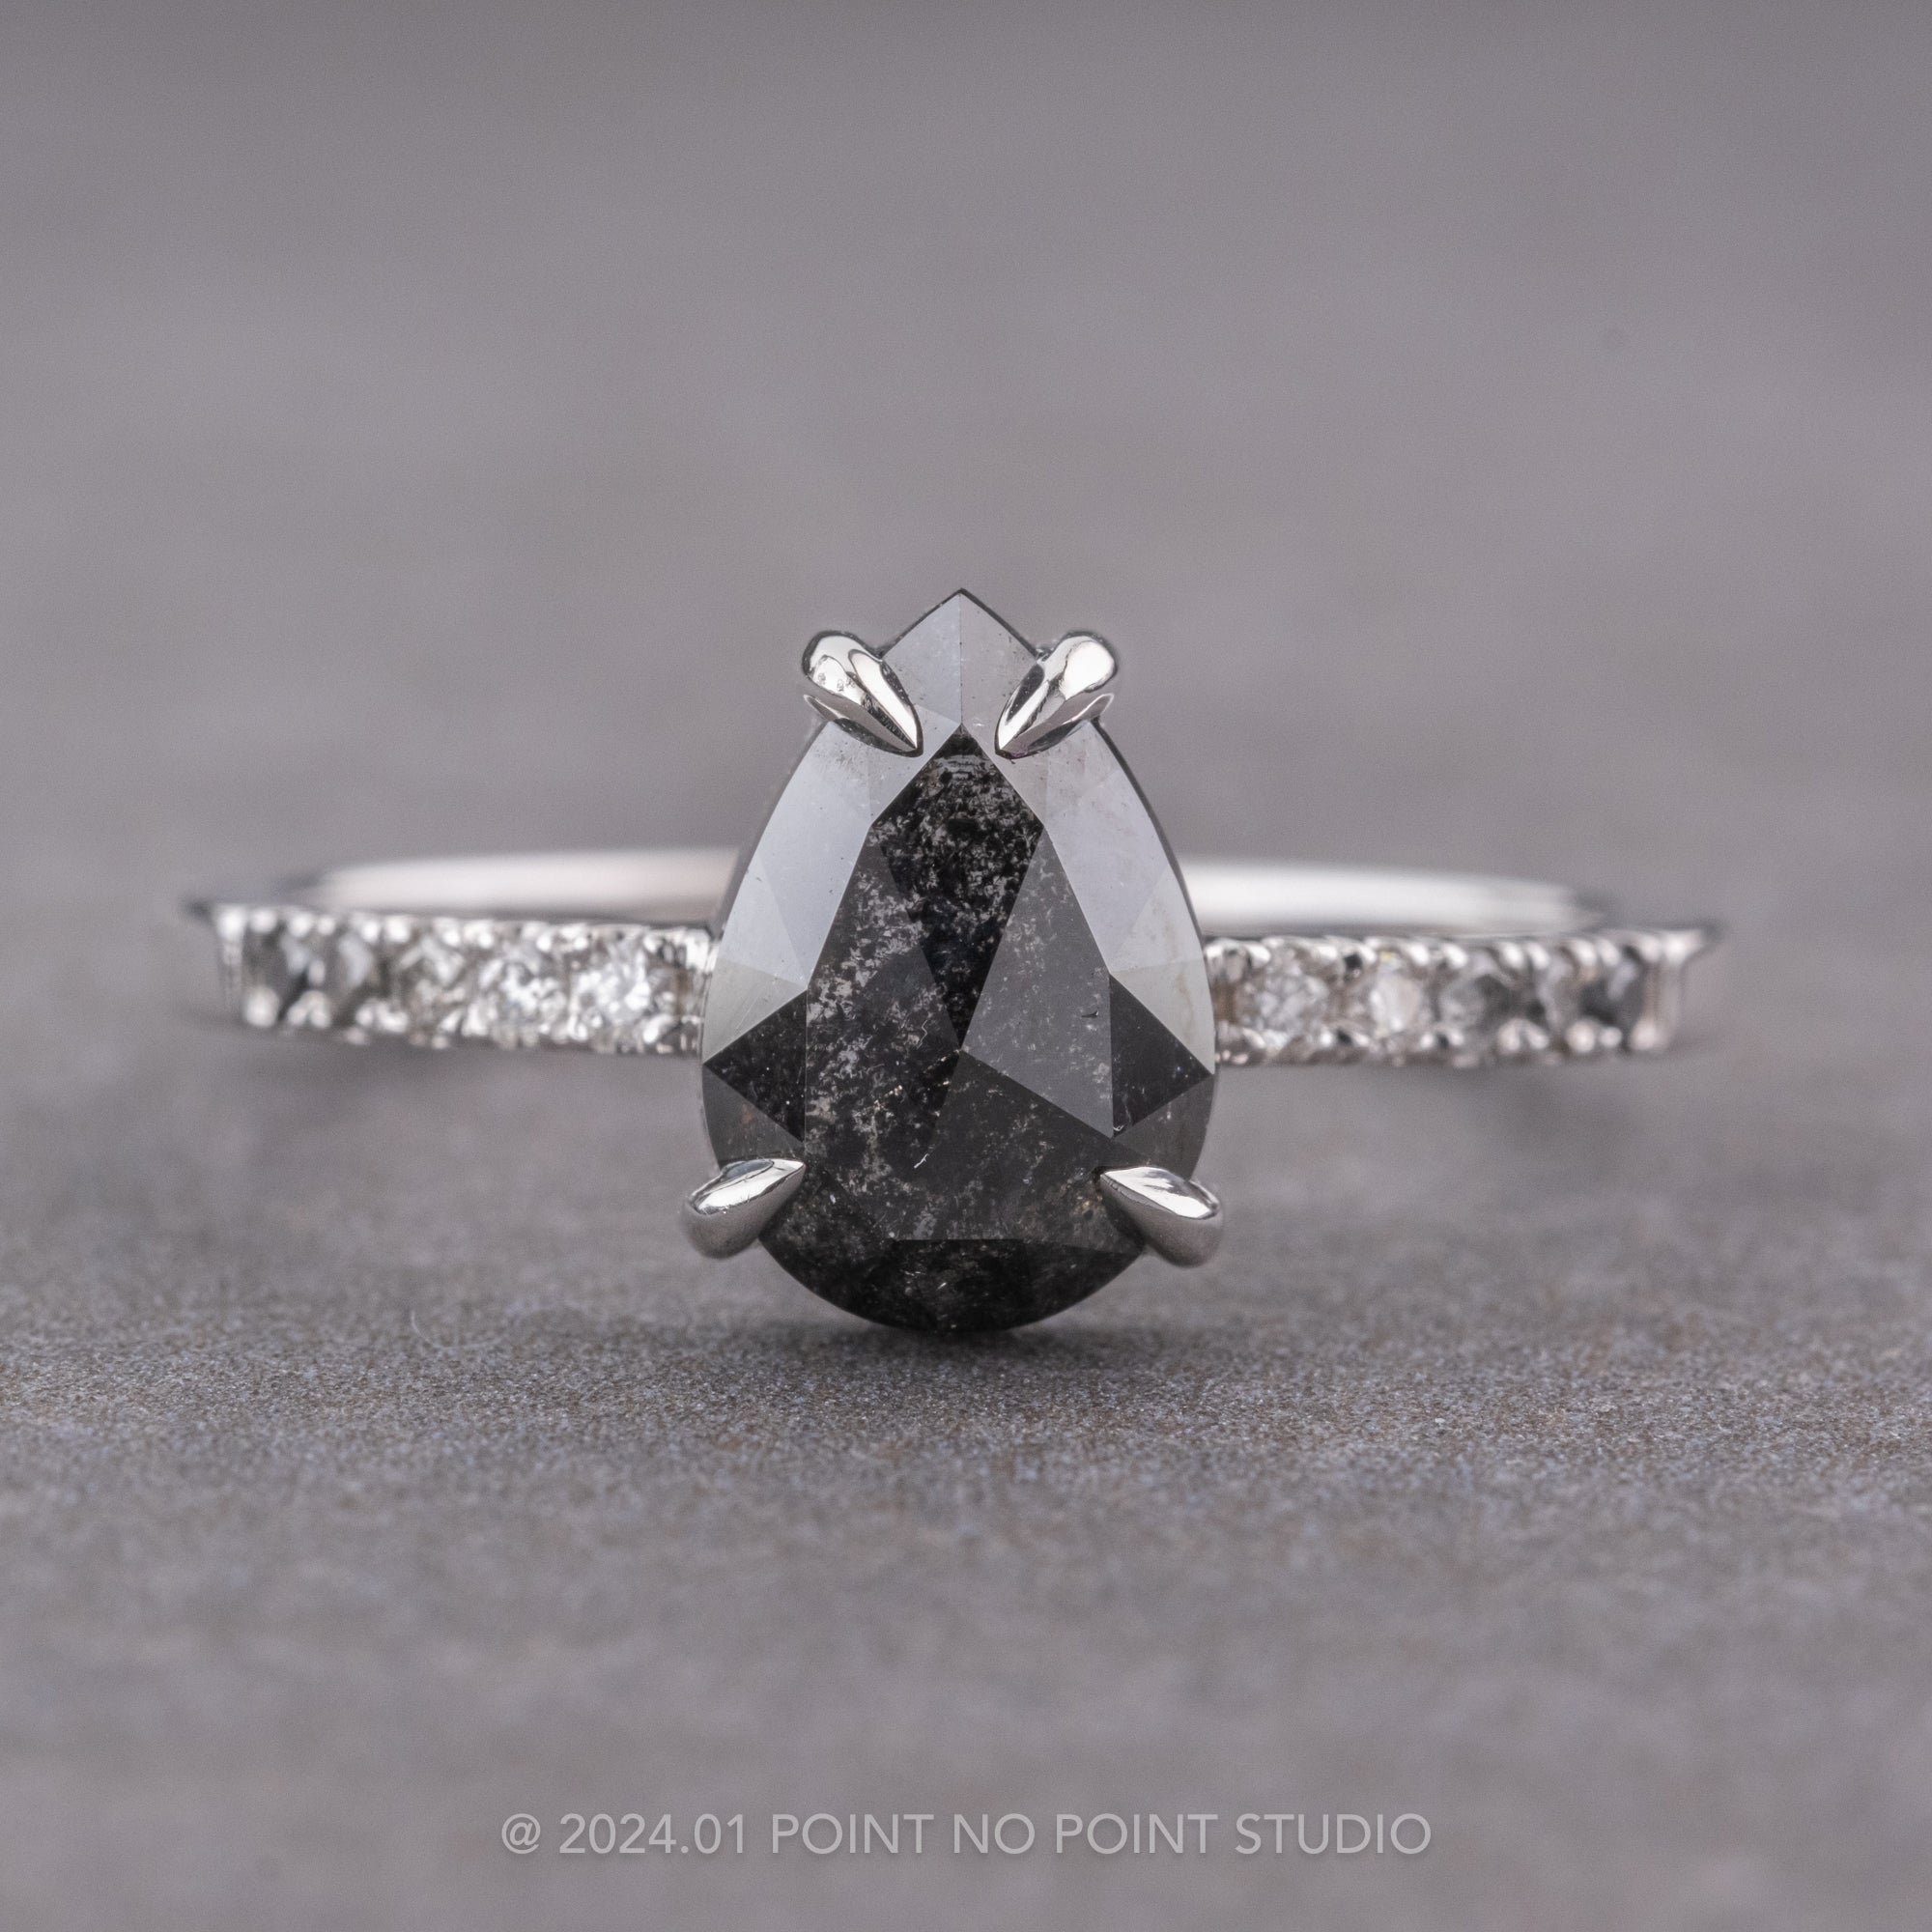 Black Speckled Diamond Engagement Ring, Point No Point Studio